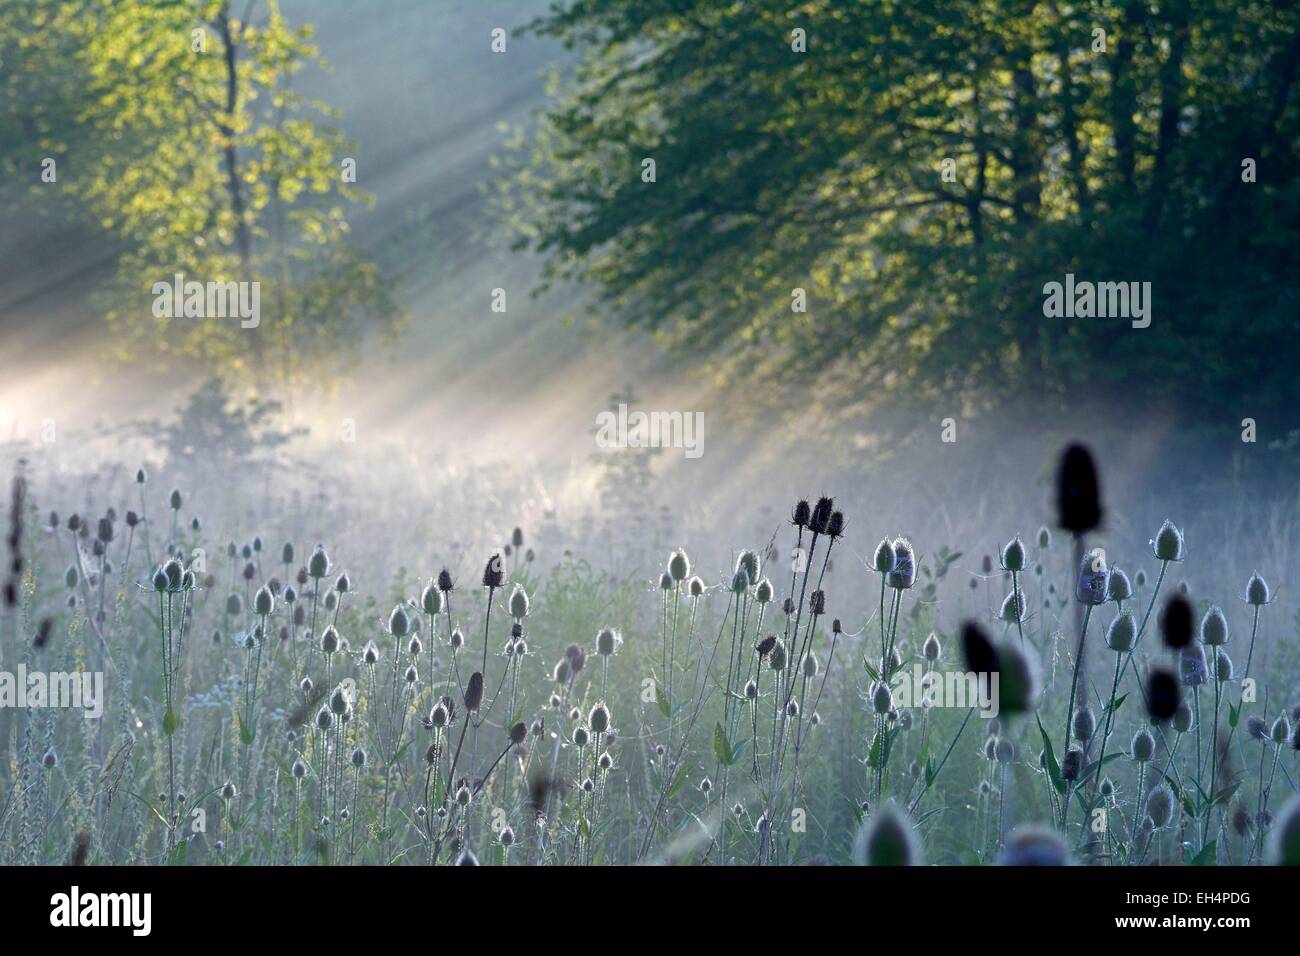 France, Doubs, Brognard, suns rays in the morning mist on a wasteland thistles Stock Photo